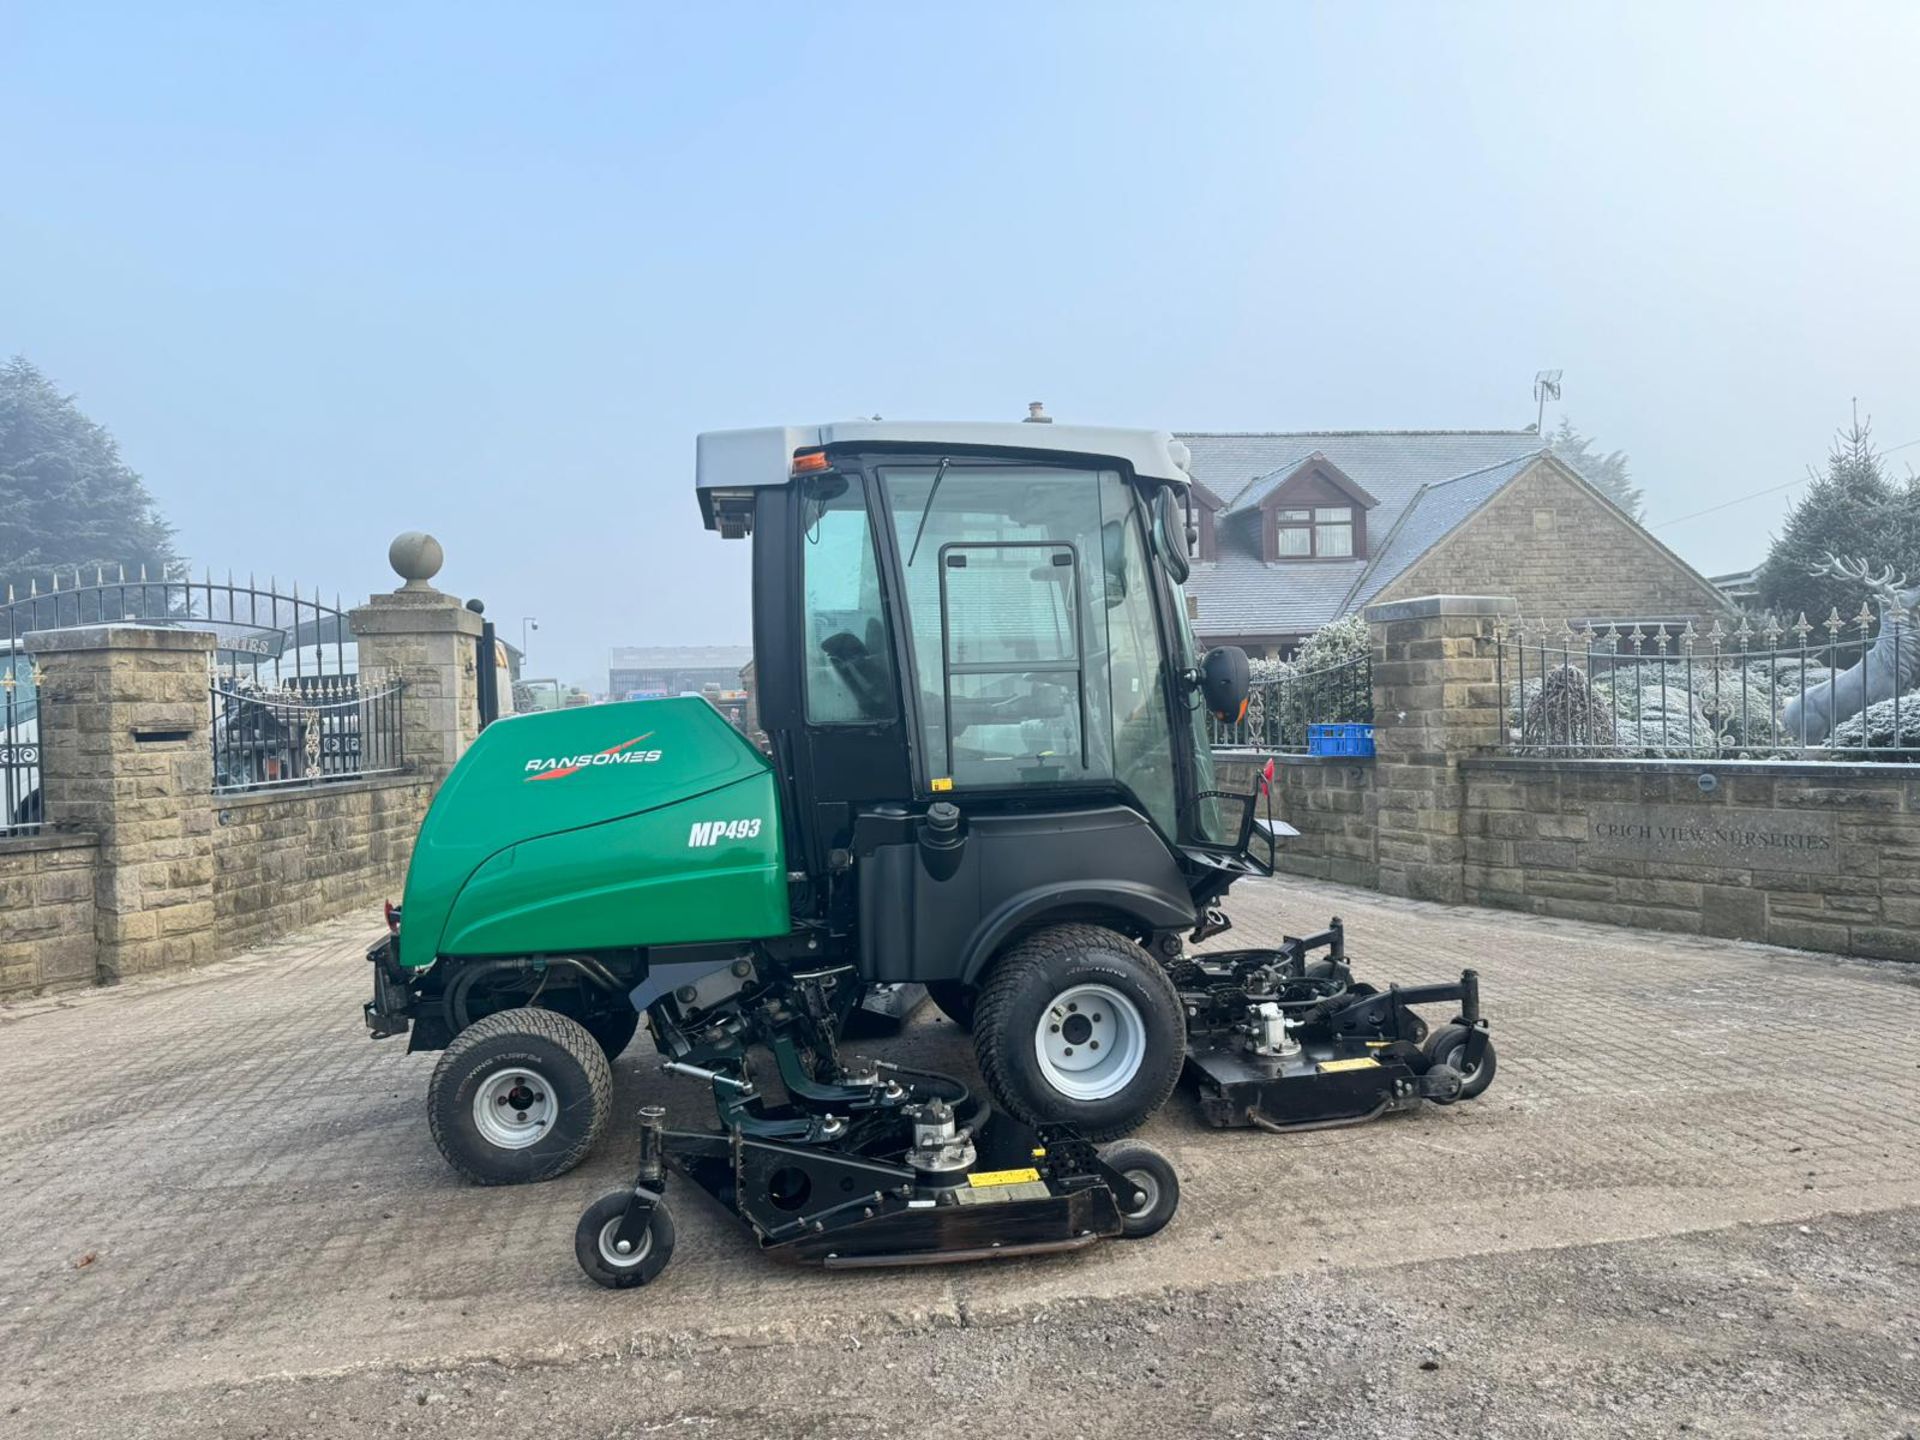 2016 RANSOMES RMP493 BATWING RIDE ON LAWN MOWER WITH FULL GLASS CAB *PLUS VAT* - Image 20 of 33